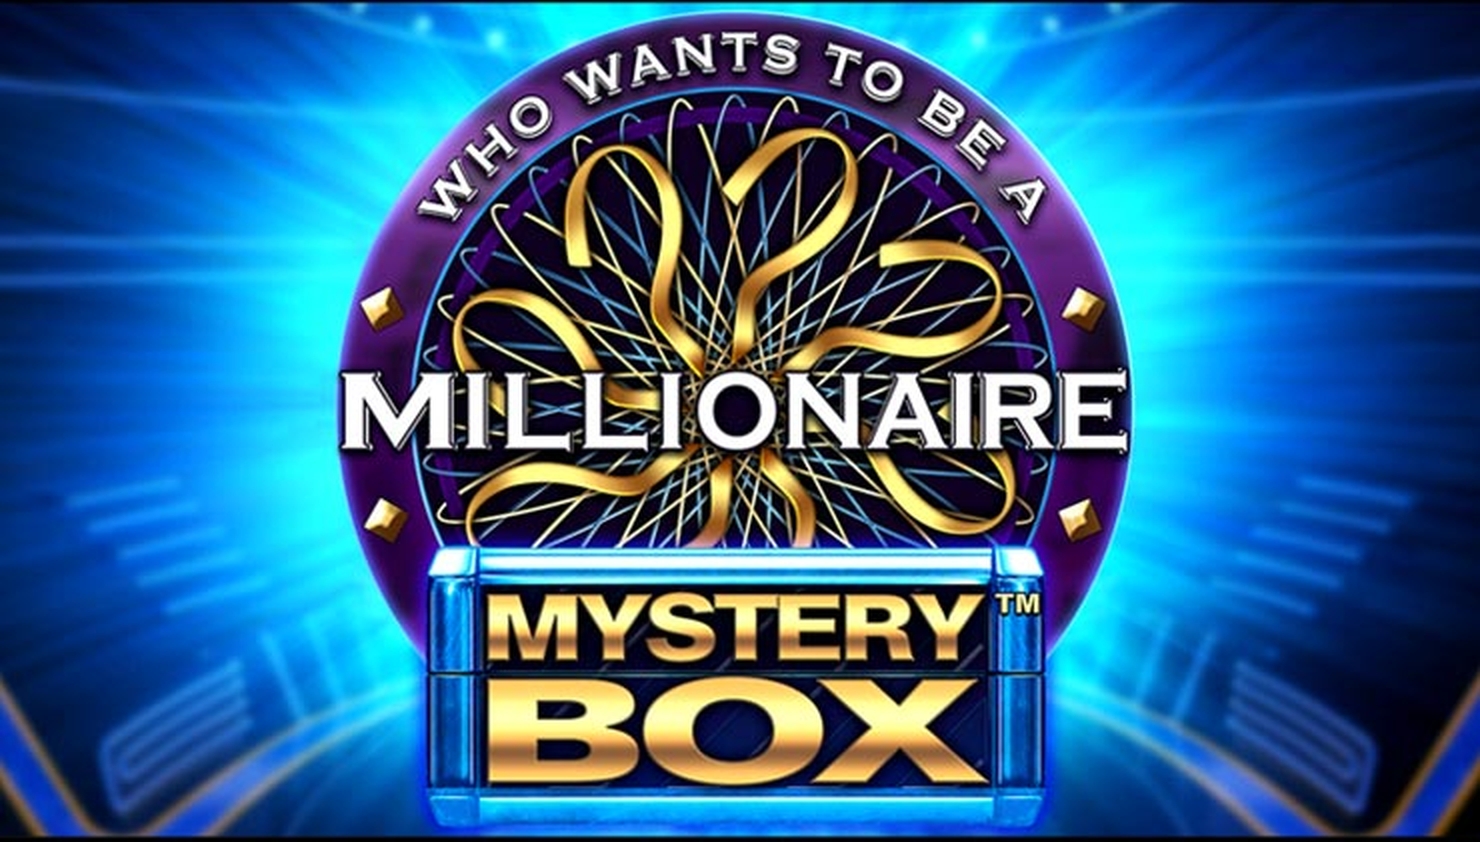 Who Wants to Be a Millionaire Mystery Box demo